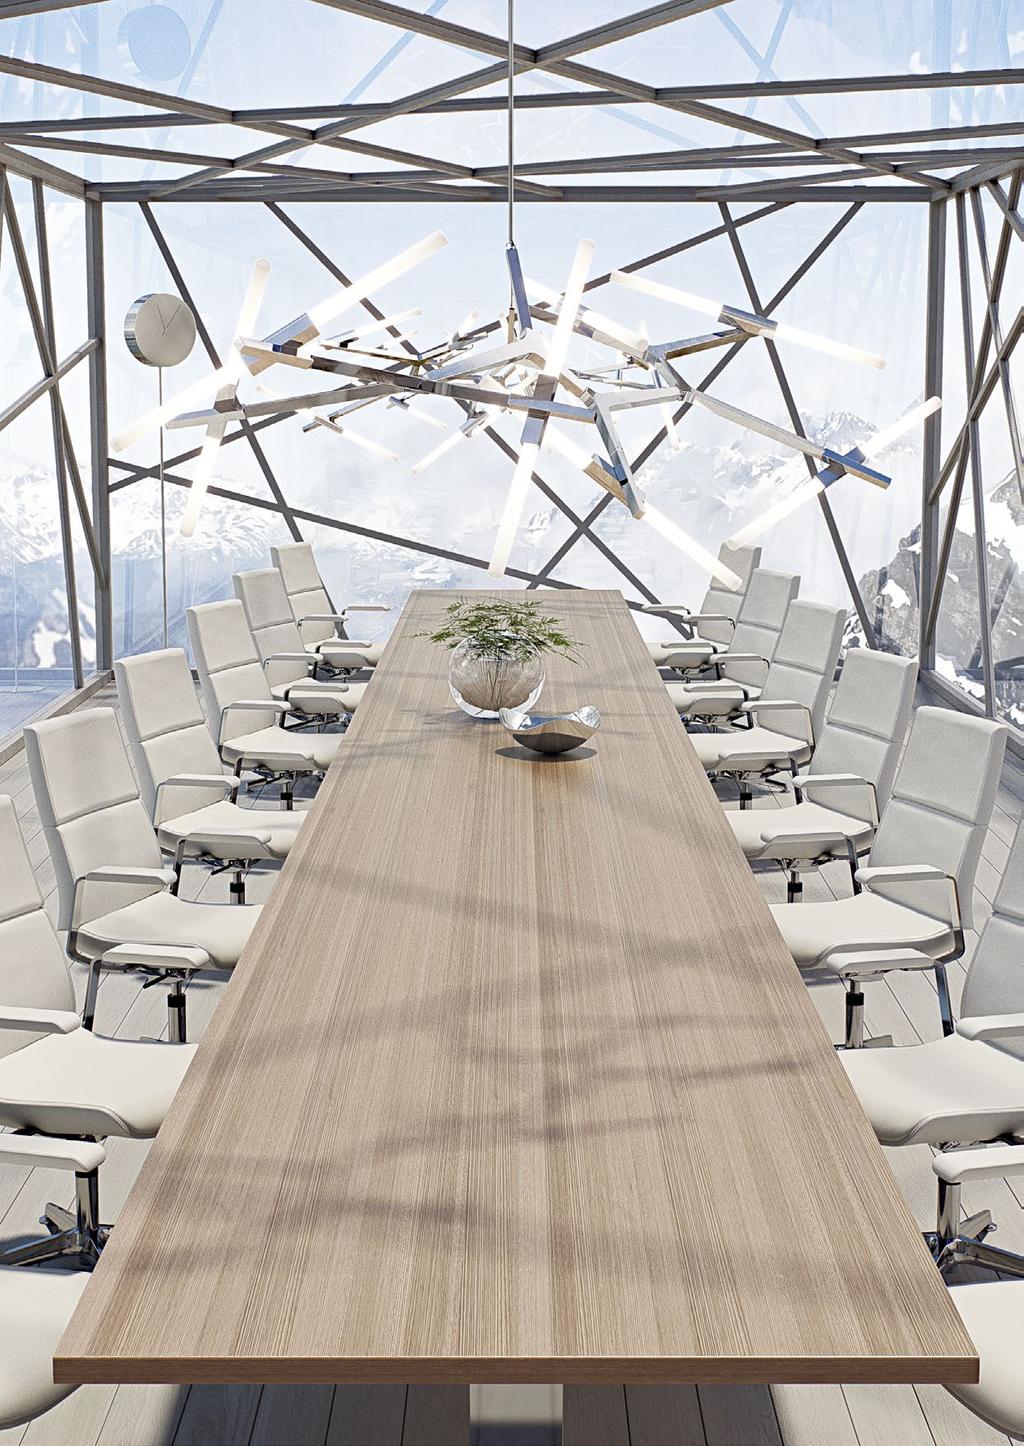 Primero 17 INSPIRING MEETINGS Meetings need functional, ergonomic and inspiring environments to encourage the creation, development and sharing of new ideas.